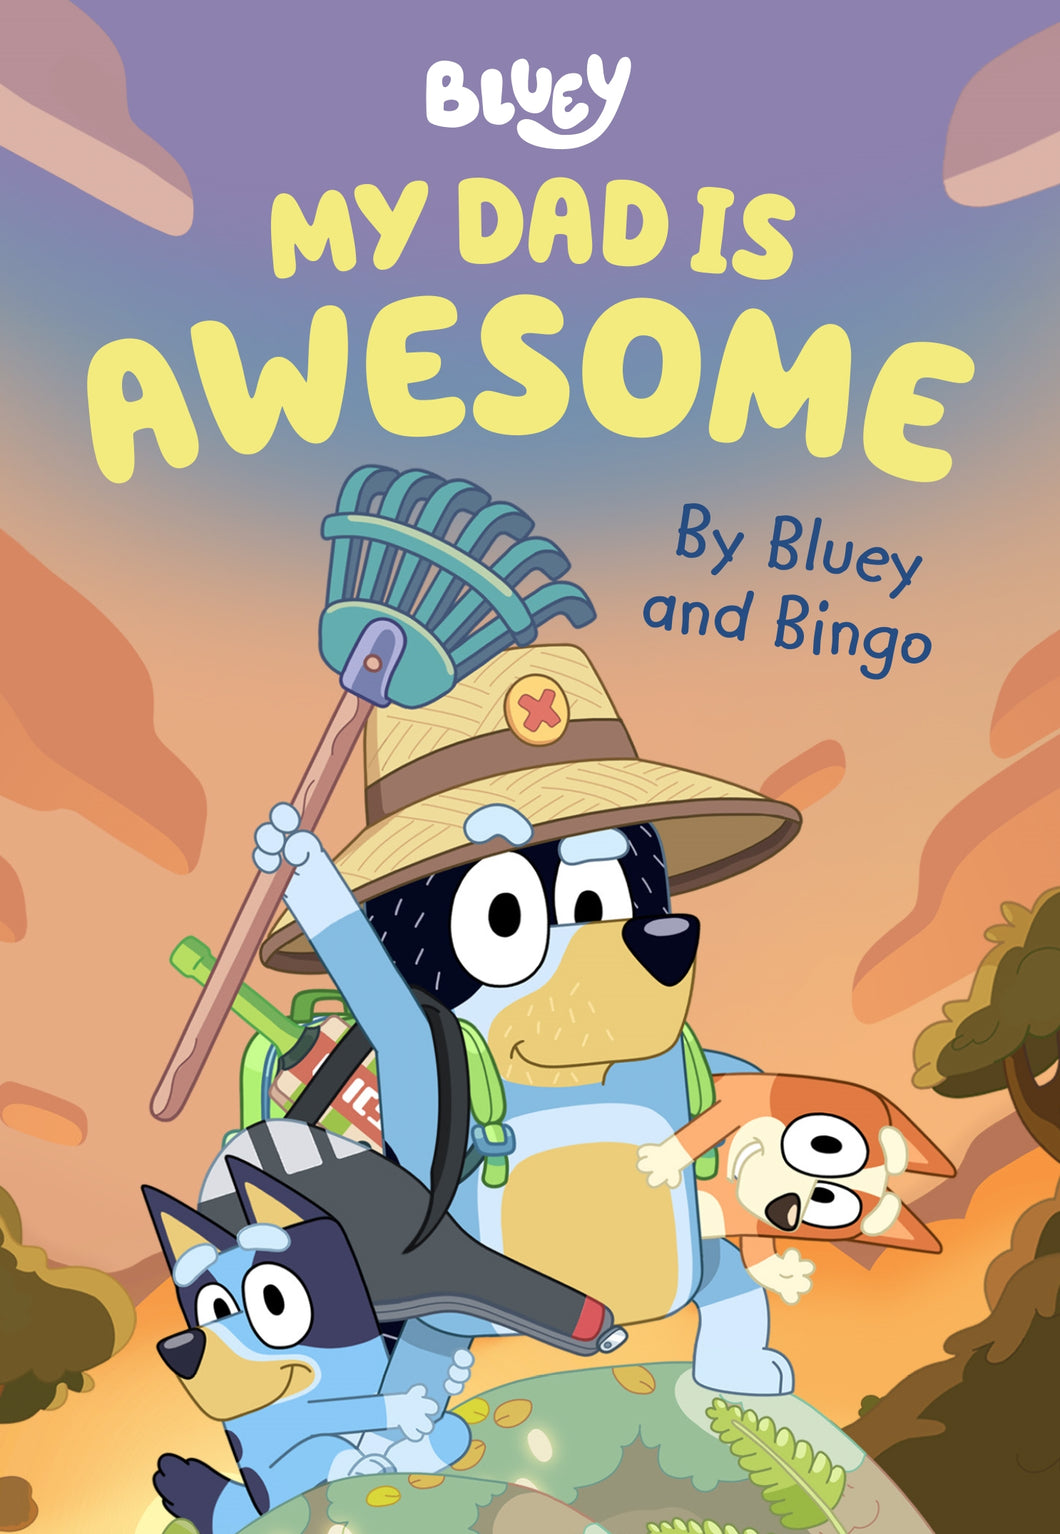 My Dad is Awesome by Bluey and Bingo